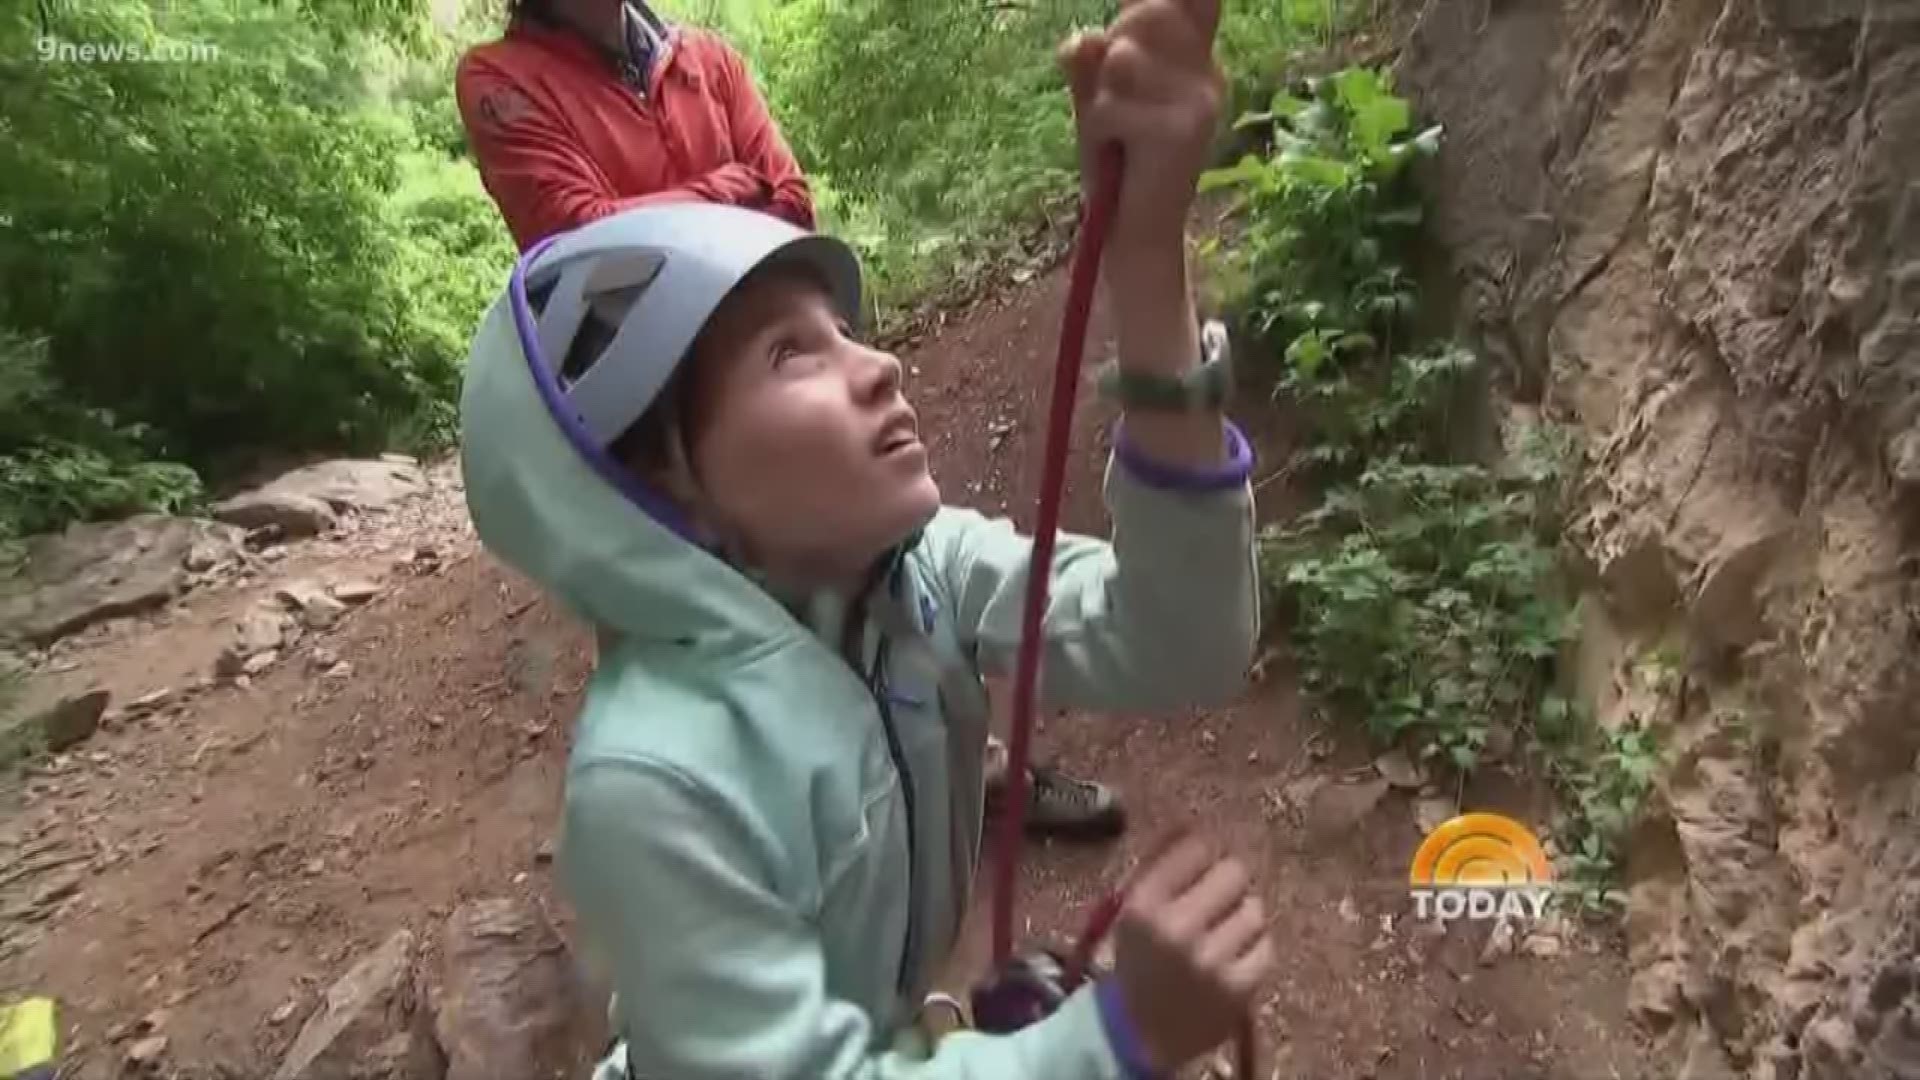 Saleh Schneiter from Glenwood Springs is just 10 years old, and she successfully topped out on the Nose Route in Yosemite Valley.